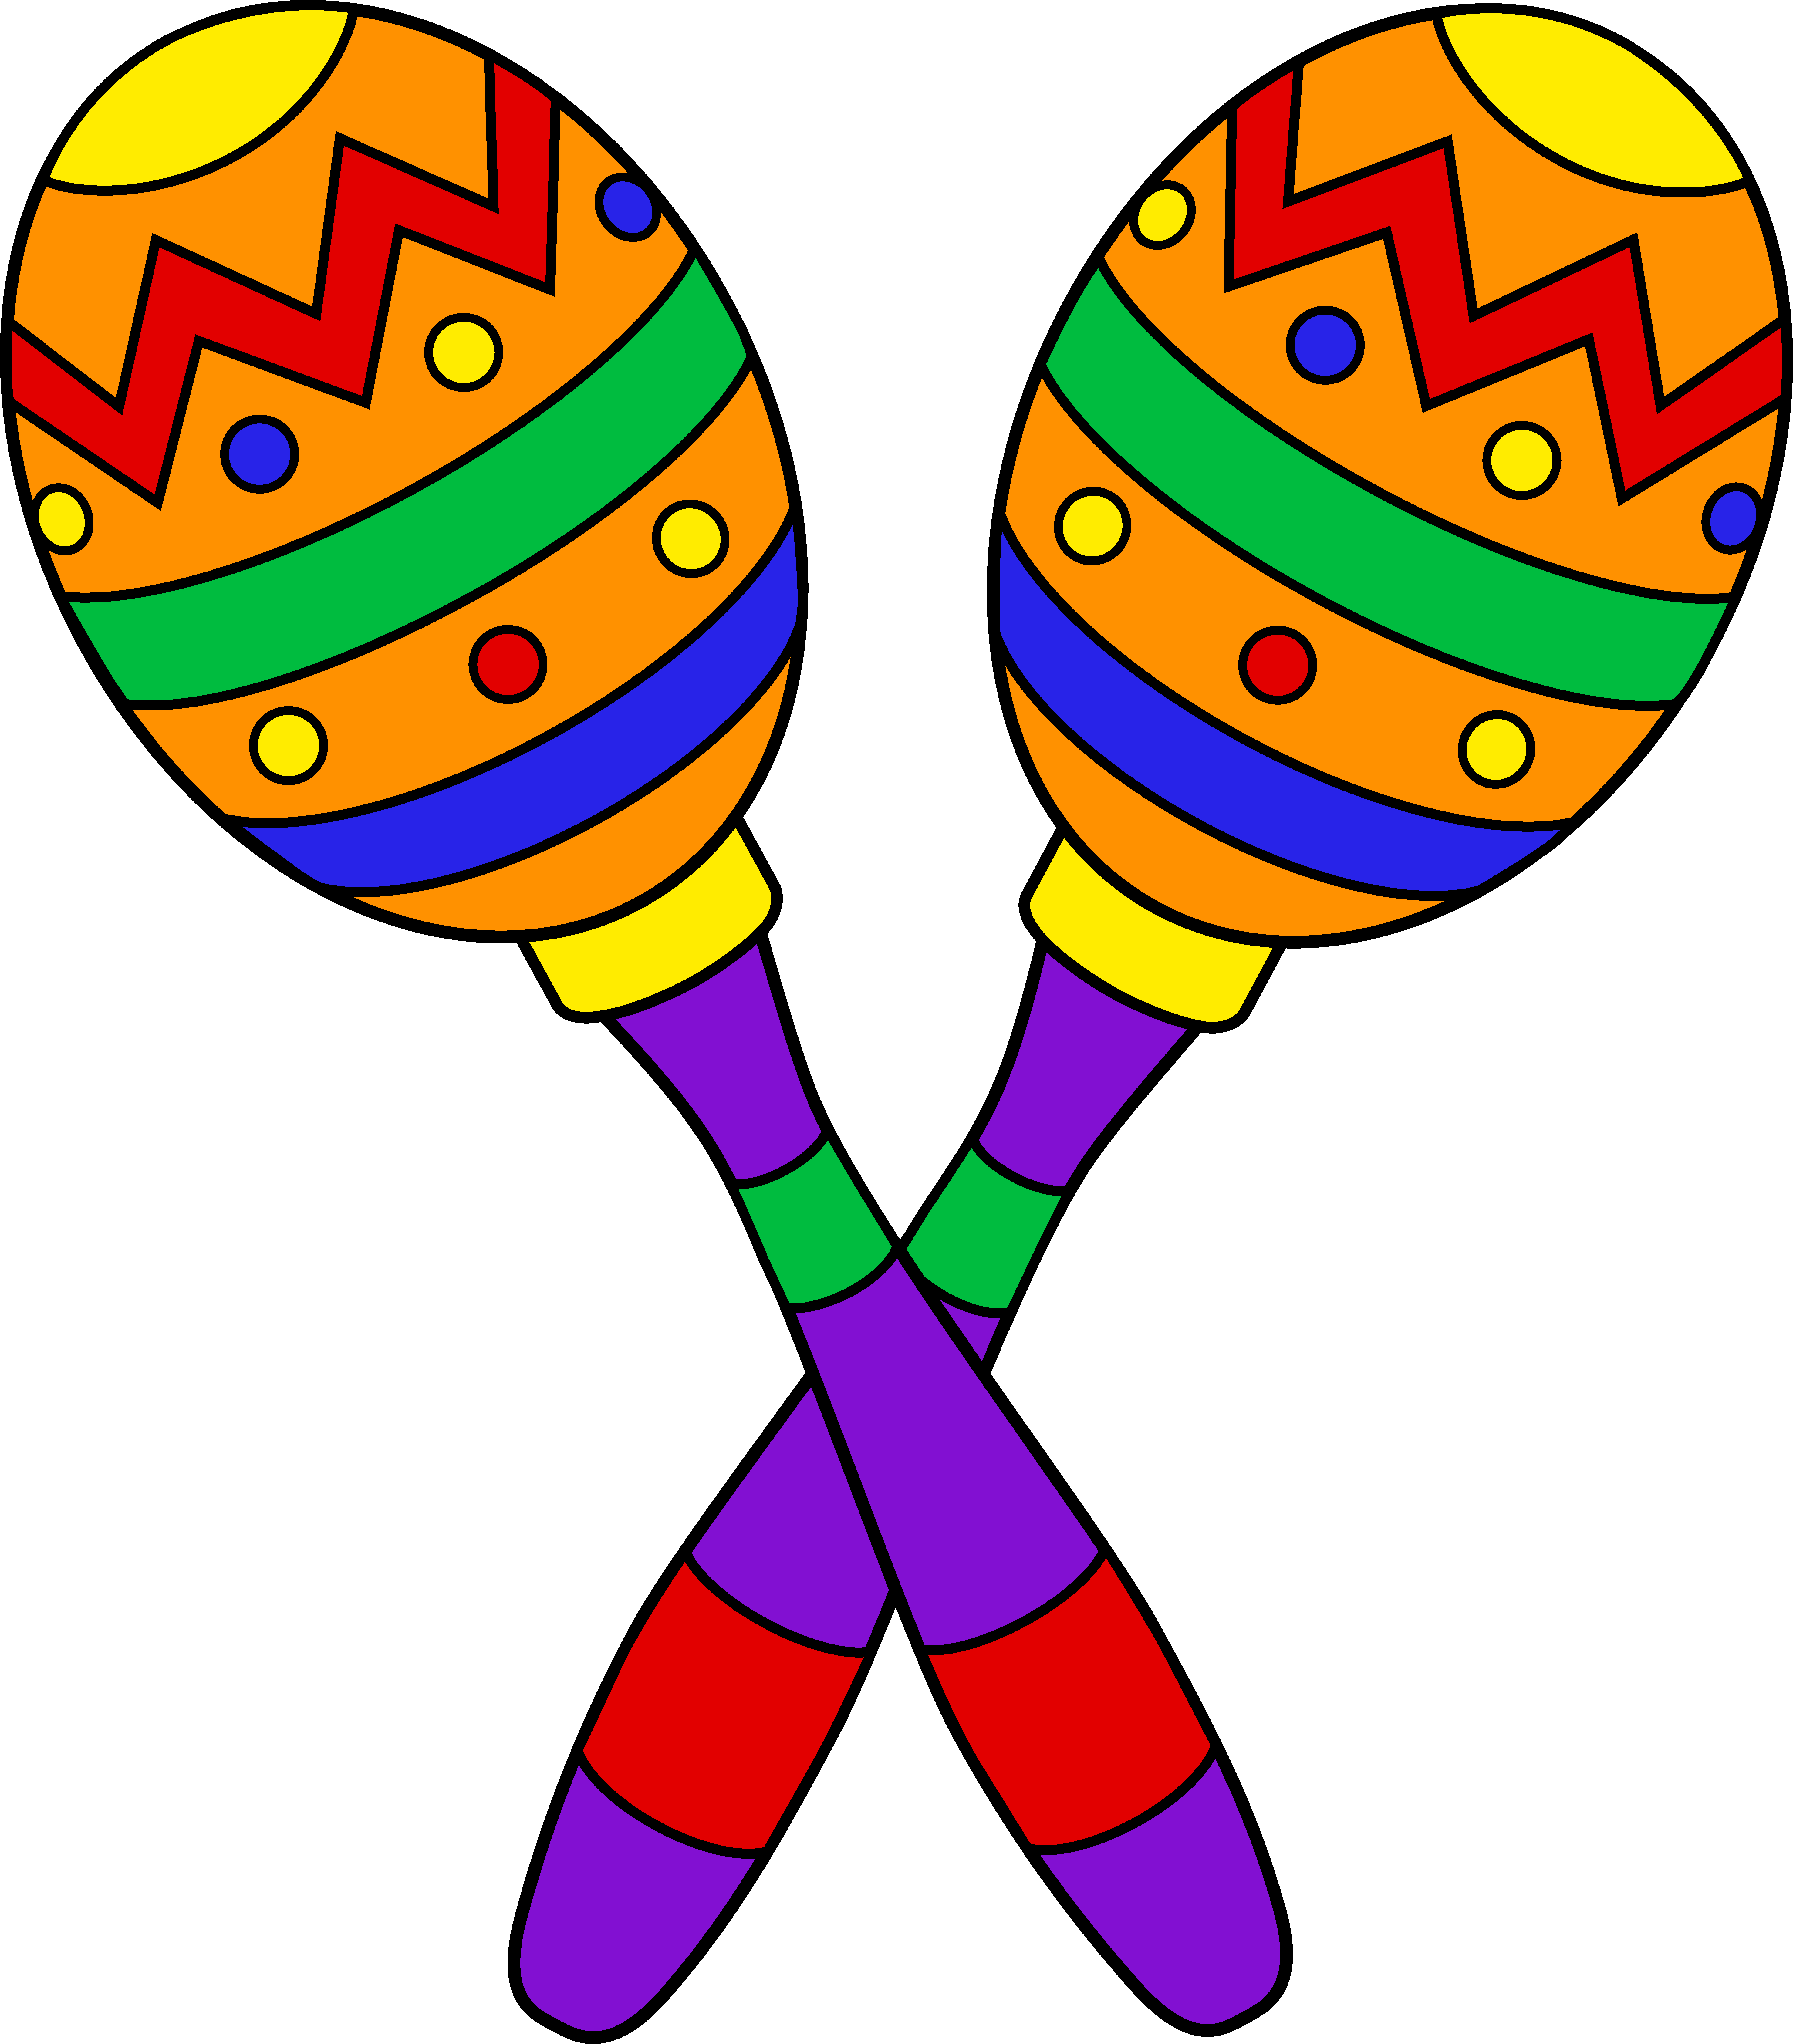 Free Mexican Clipart